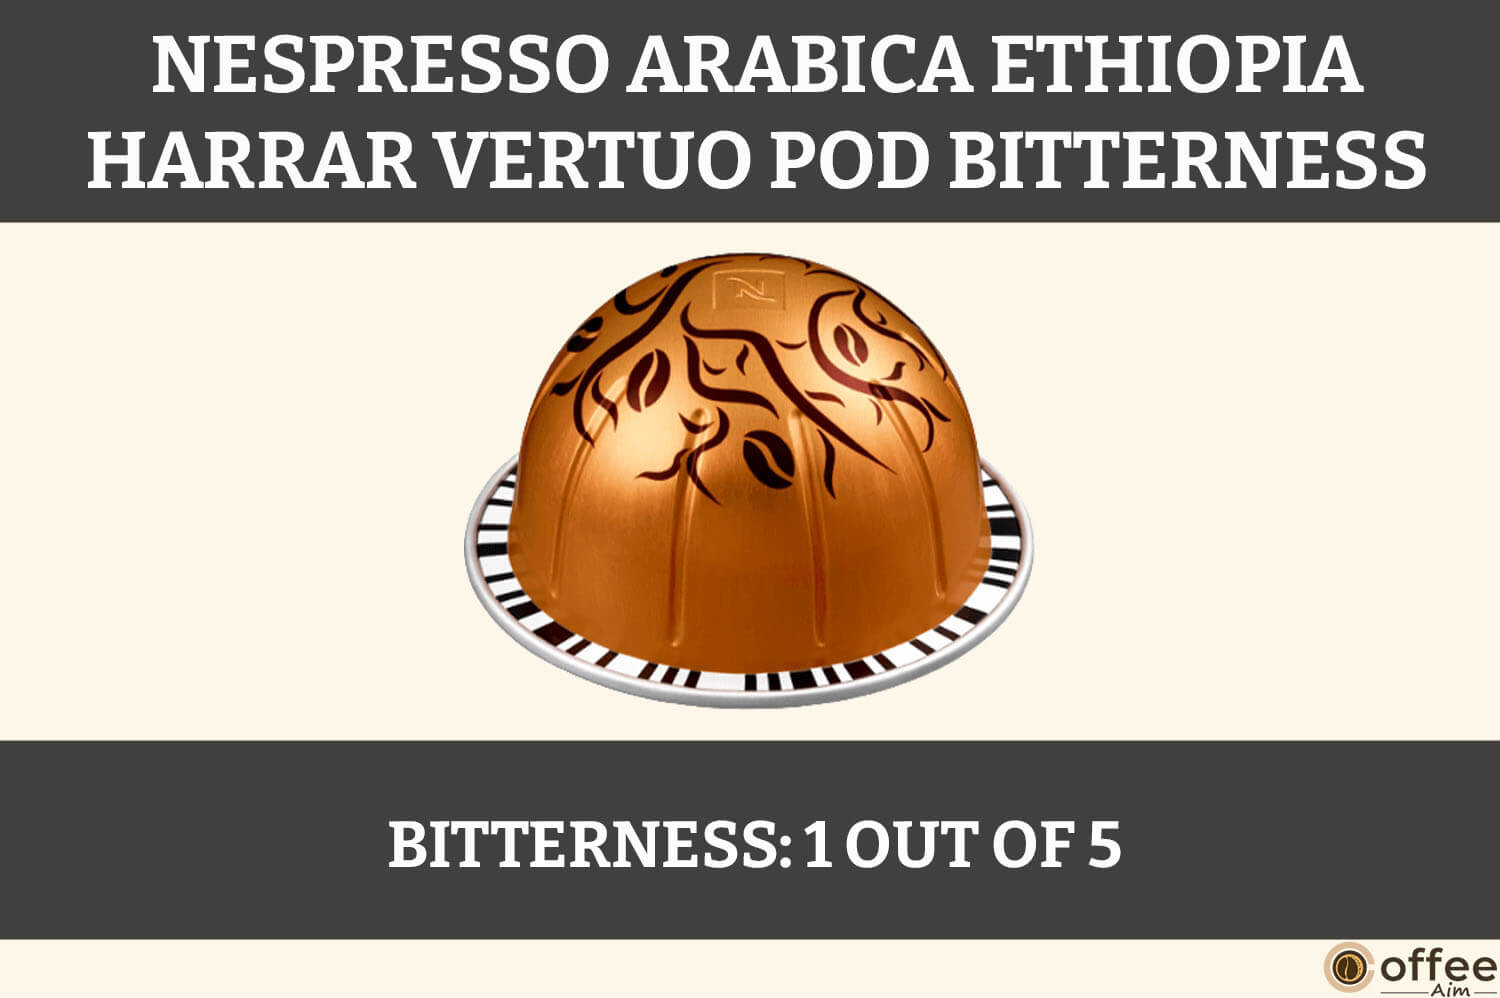 This image captures the essence of the Nespresso Arabica Ethiopia Harrar Vertuo Pod, illustrating the nuanced bitterness discussed in the article 'Nespresso Arabica Ethiopia Harrar Vertuo Pod Review.